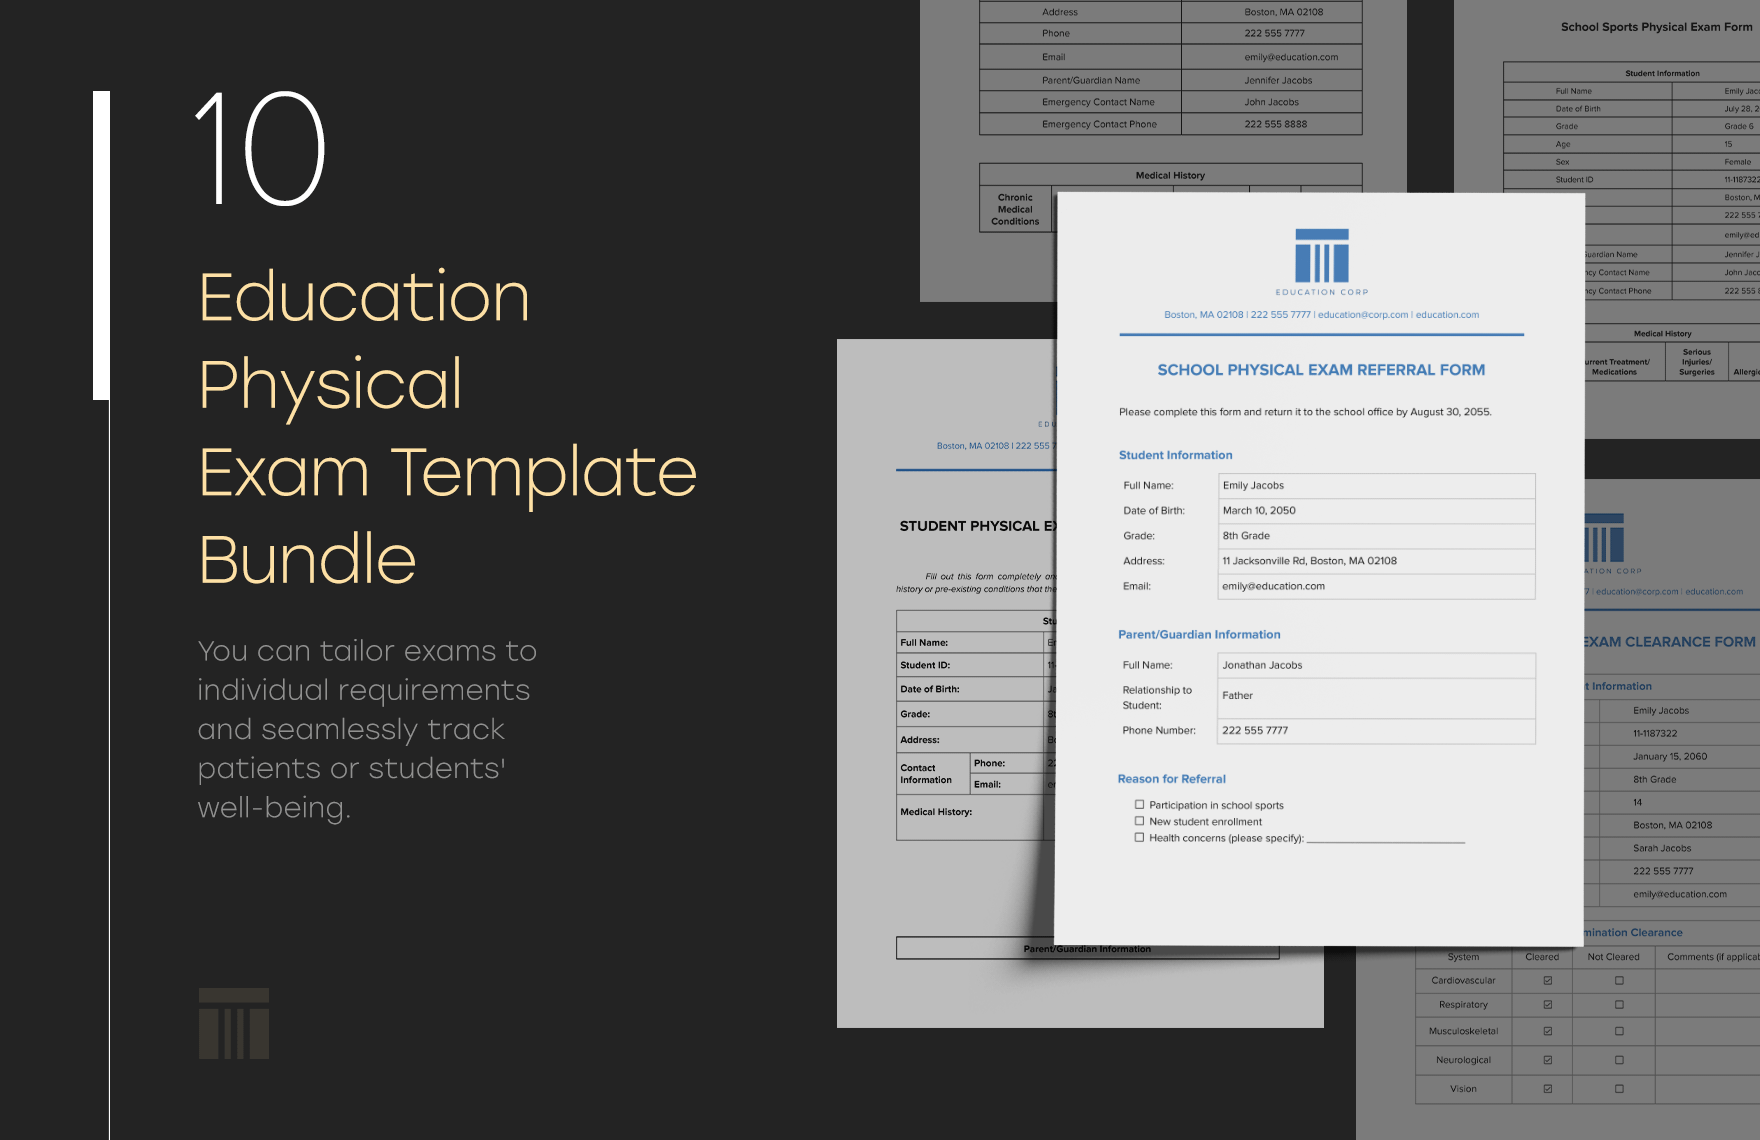 10 Education Physical Exam Template Bundle